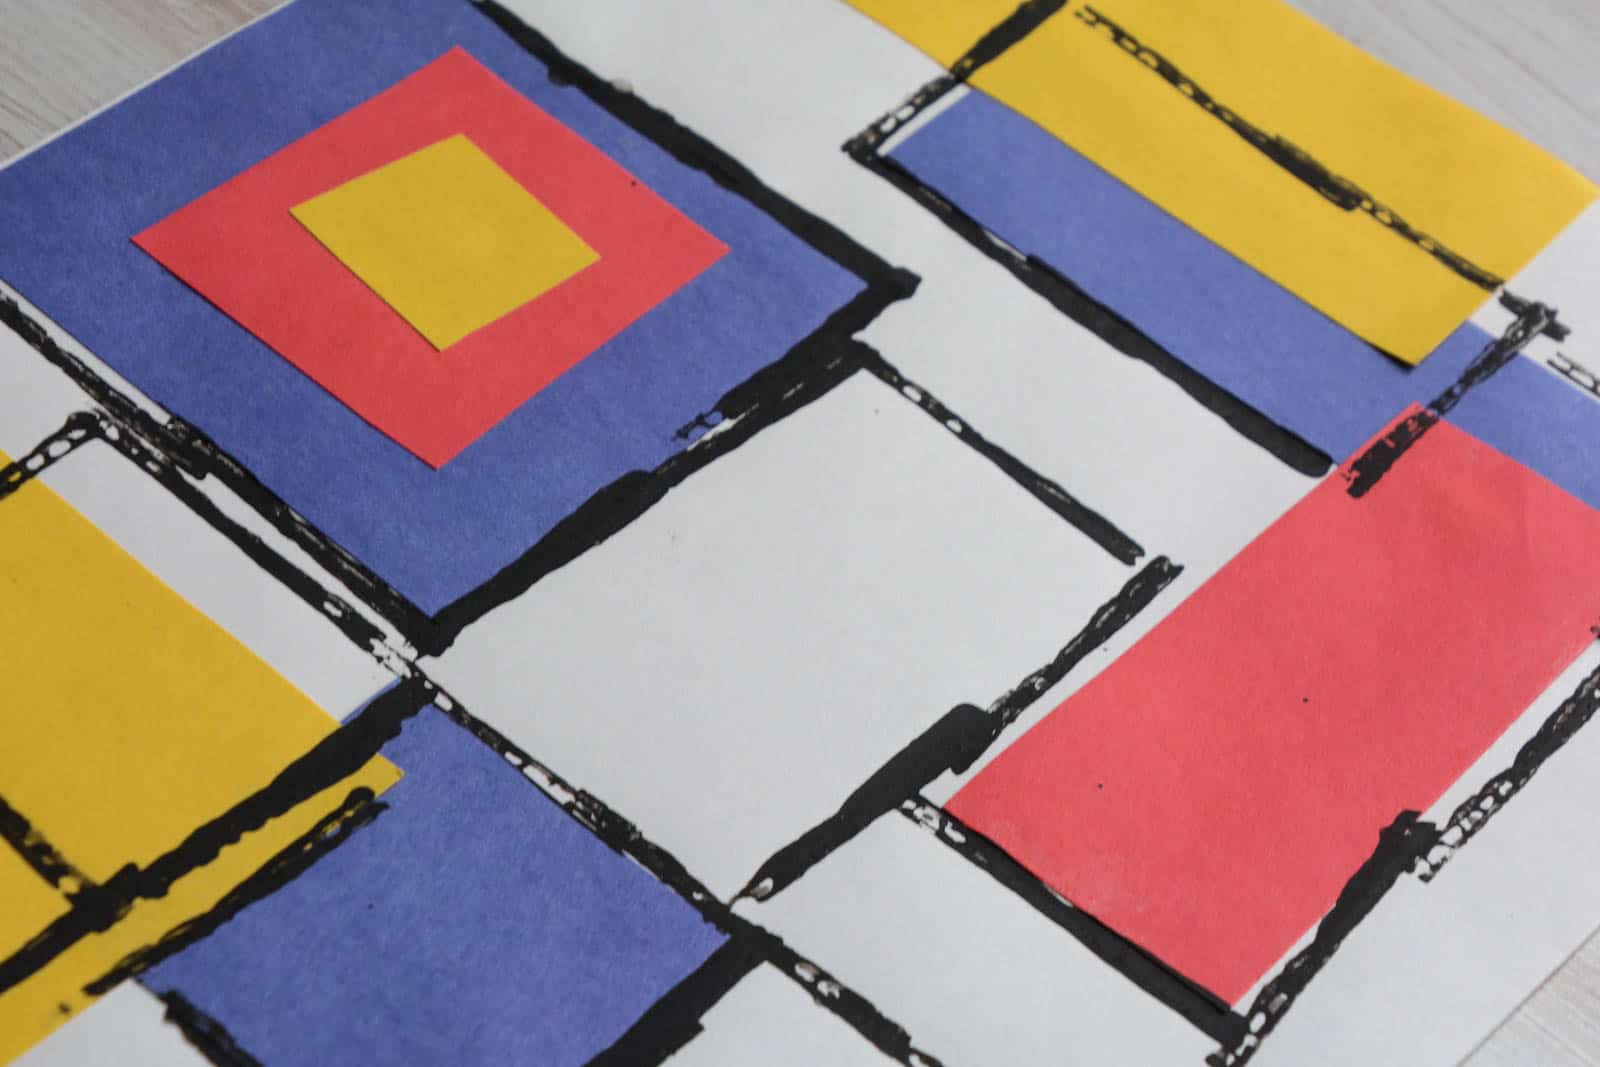 collage of yellow, blue and red paper squares and rectangles with black lines.